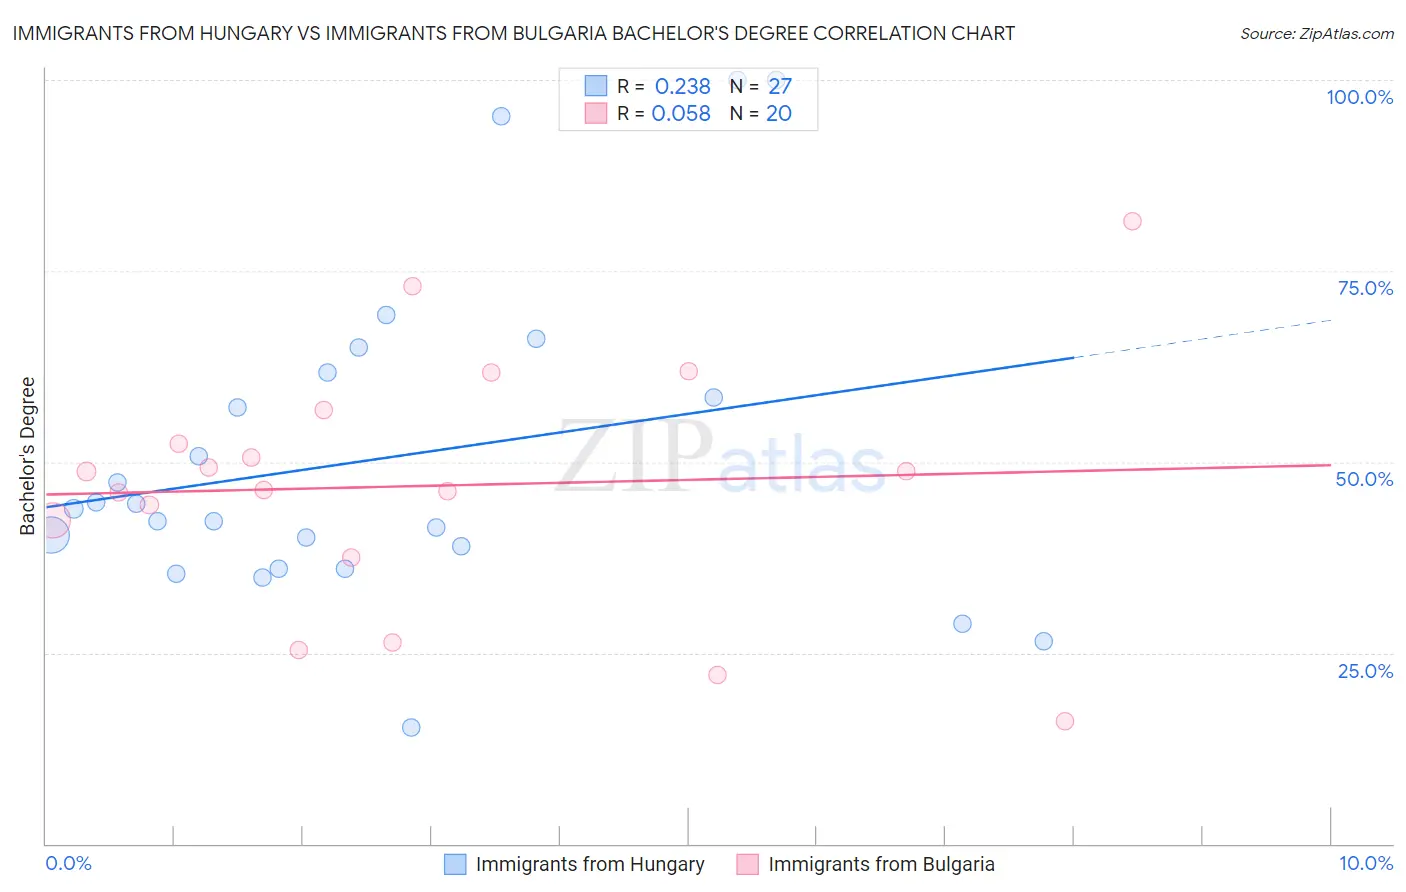 Immigrants from Hungary vs Immigrants from Bulgaria Bachelor's Degree